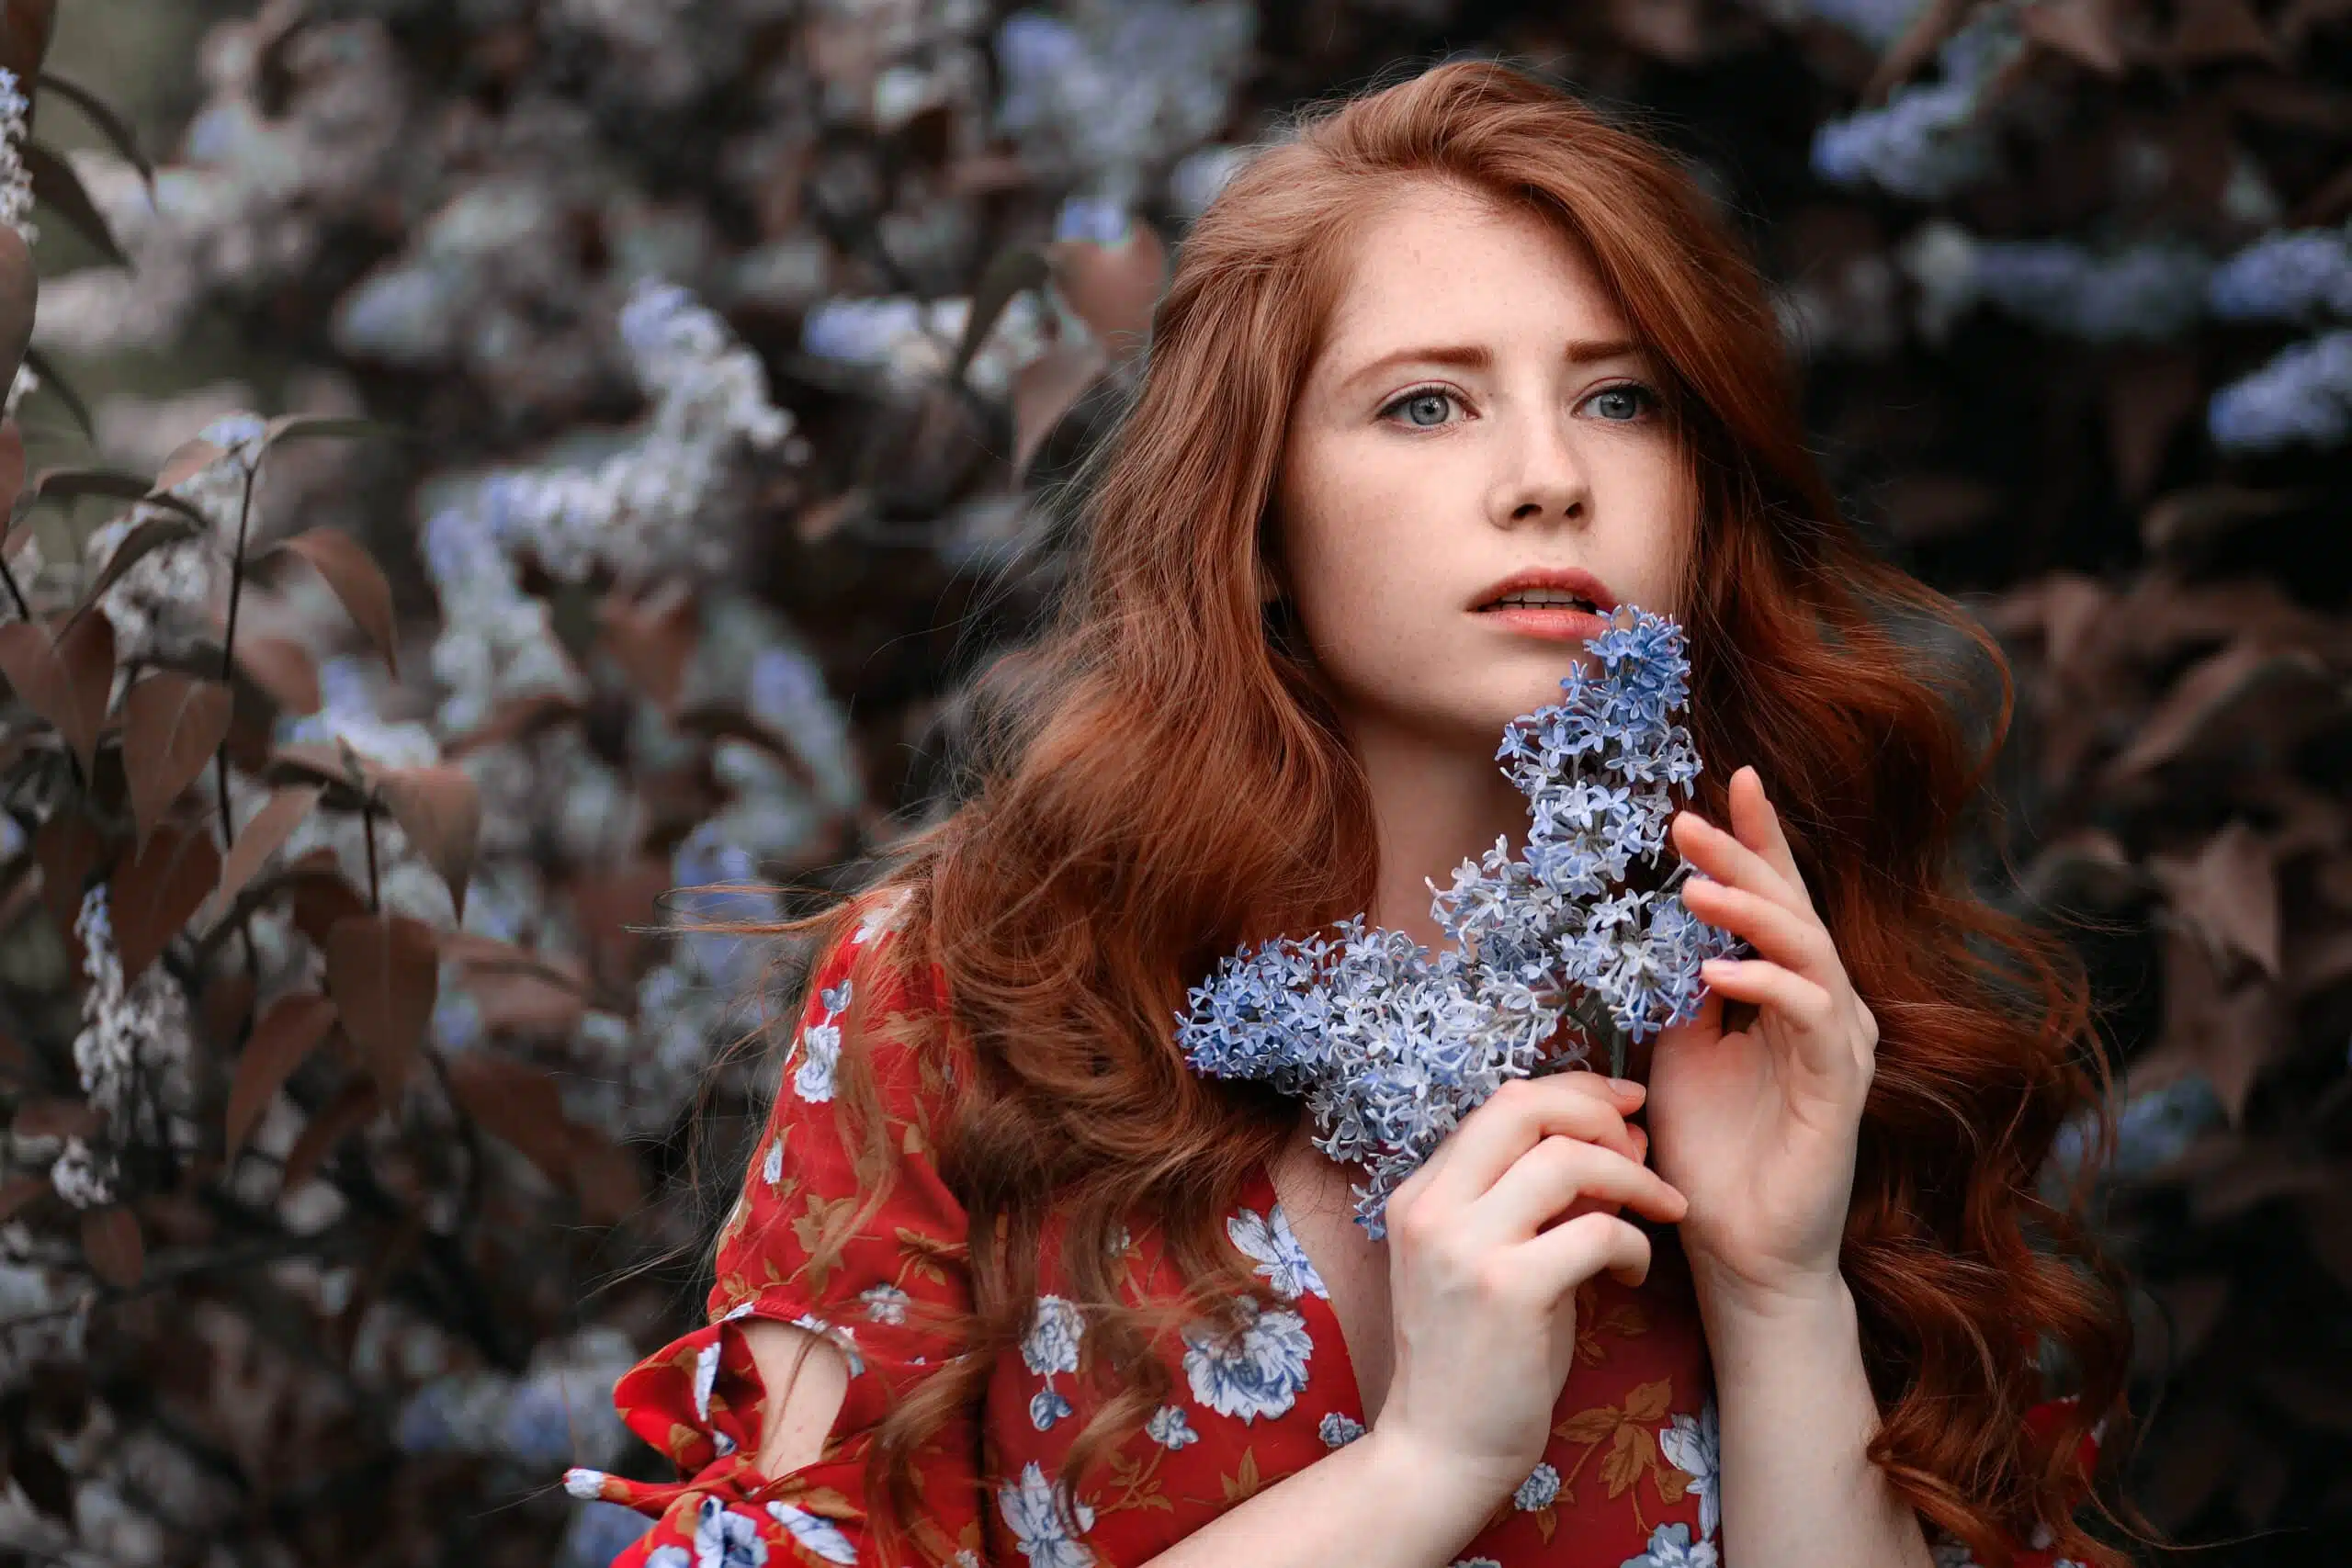 Young woman with long red hair in red dress holding lilac flower